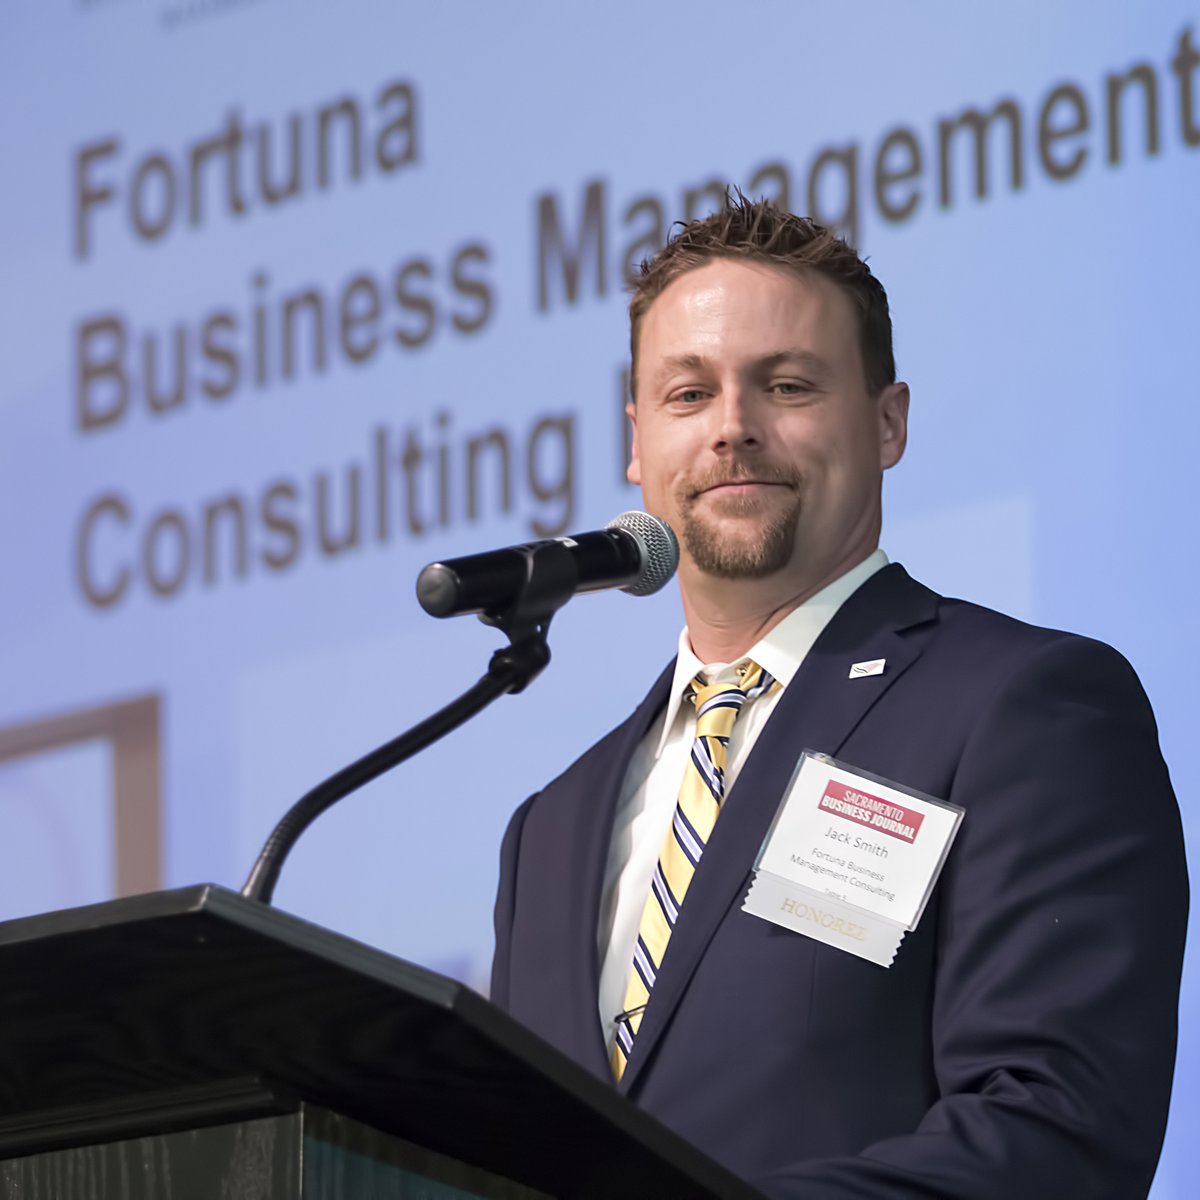 Jack Smith  CEO - Fortuna Business Management Consulting